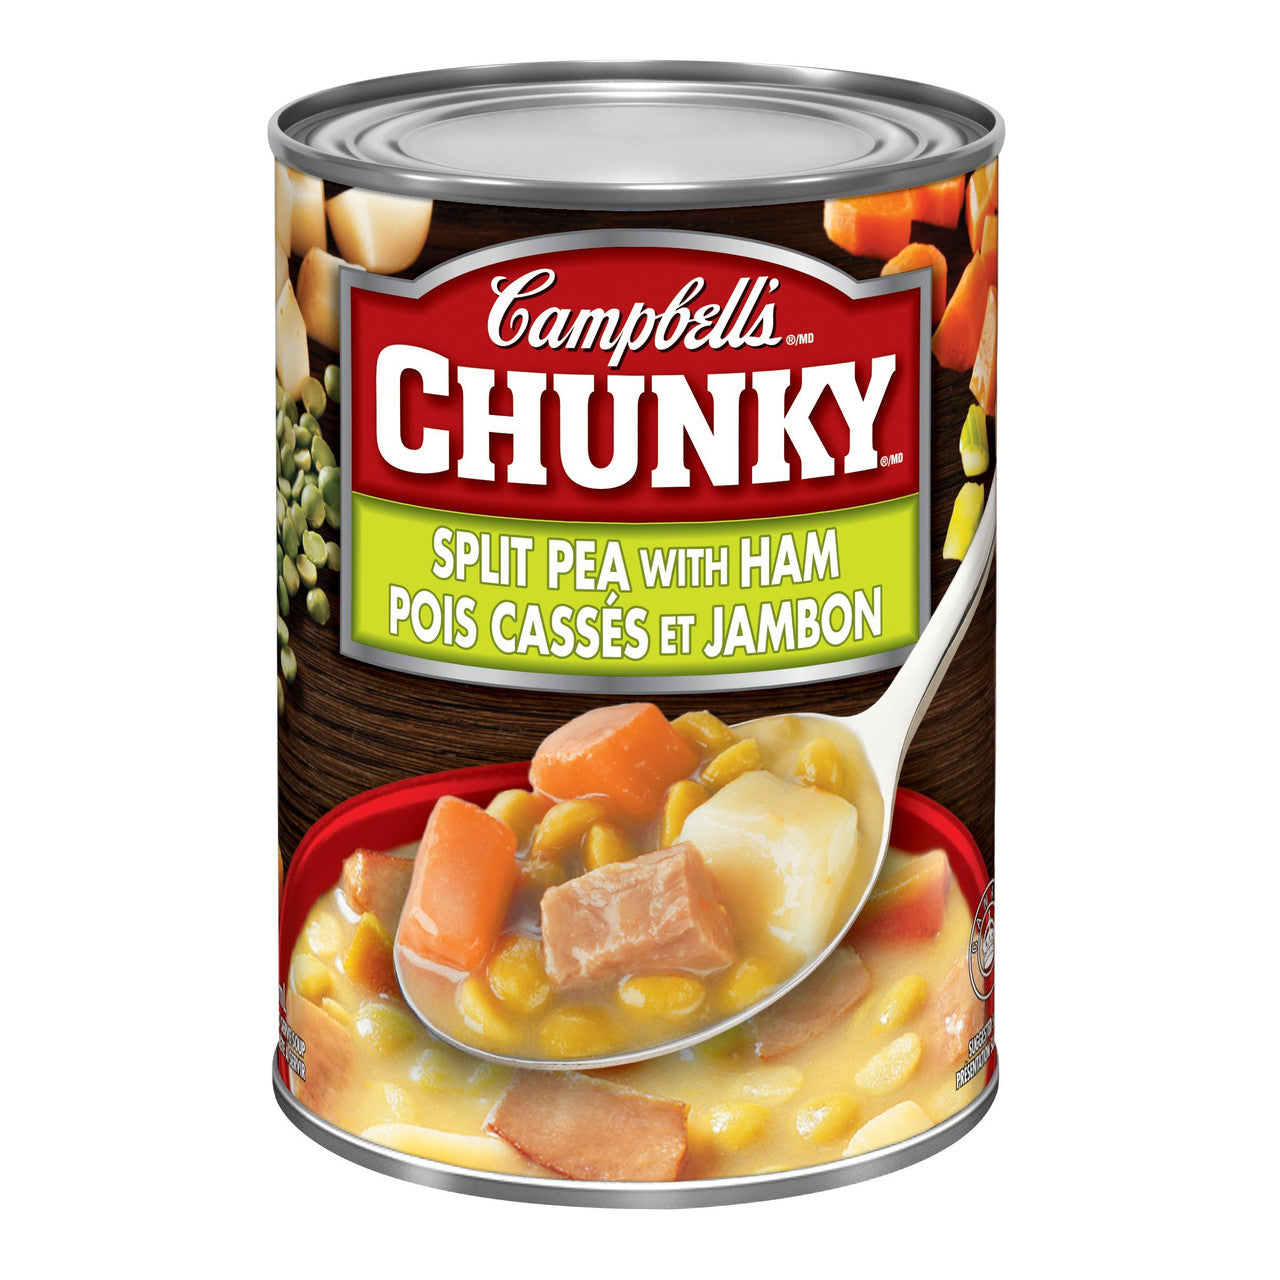 Campbell's Chunky Split Pea with Ham Soup, 540mL/18.3 oz. (Canadian)